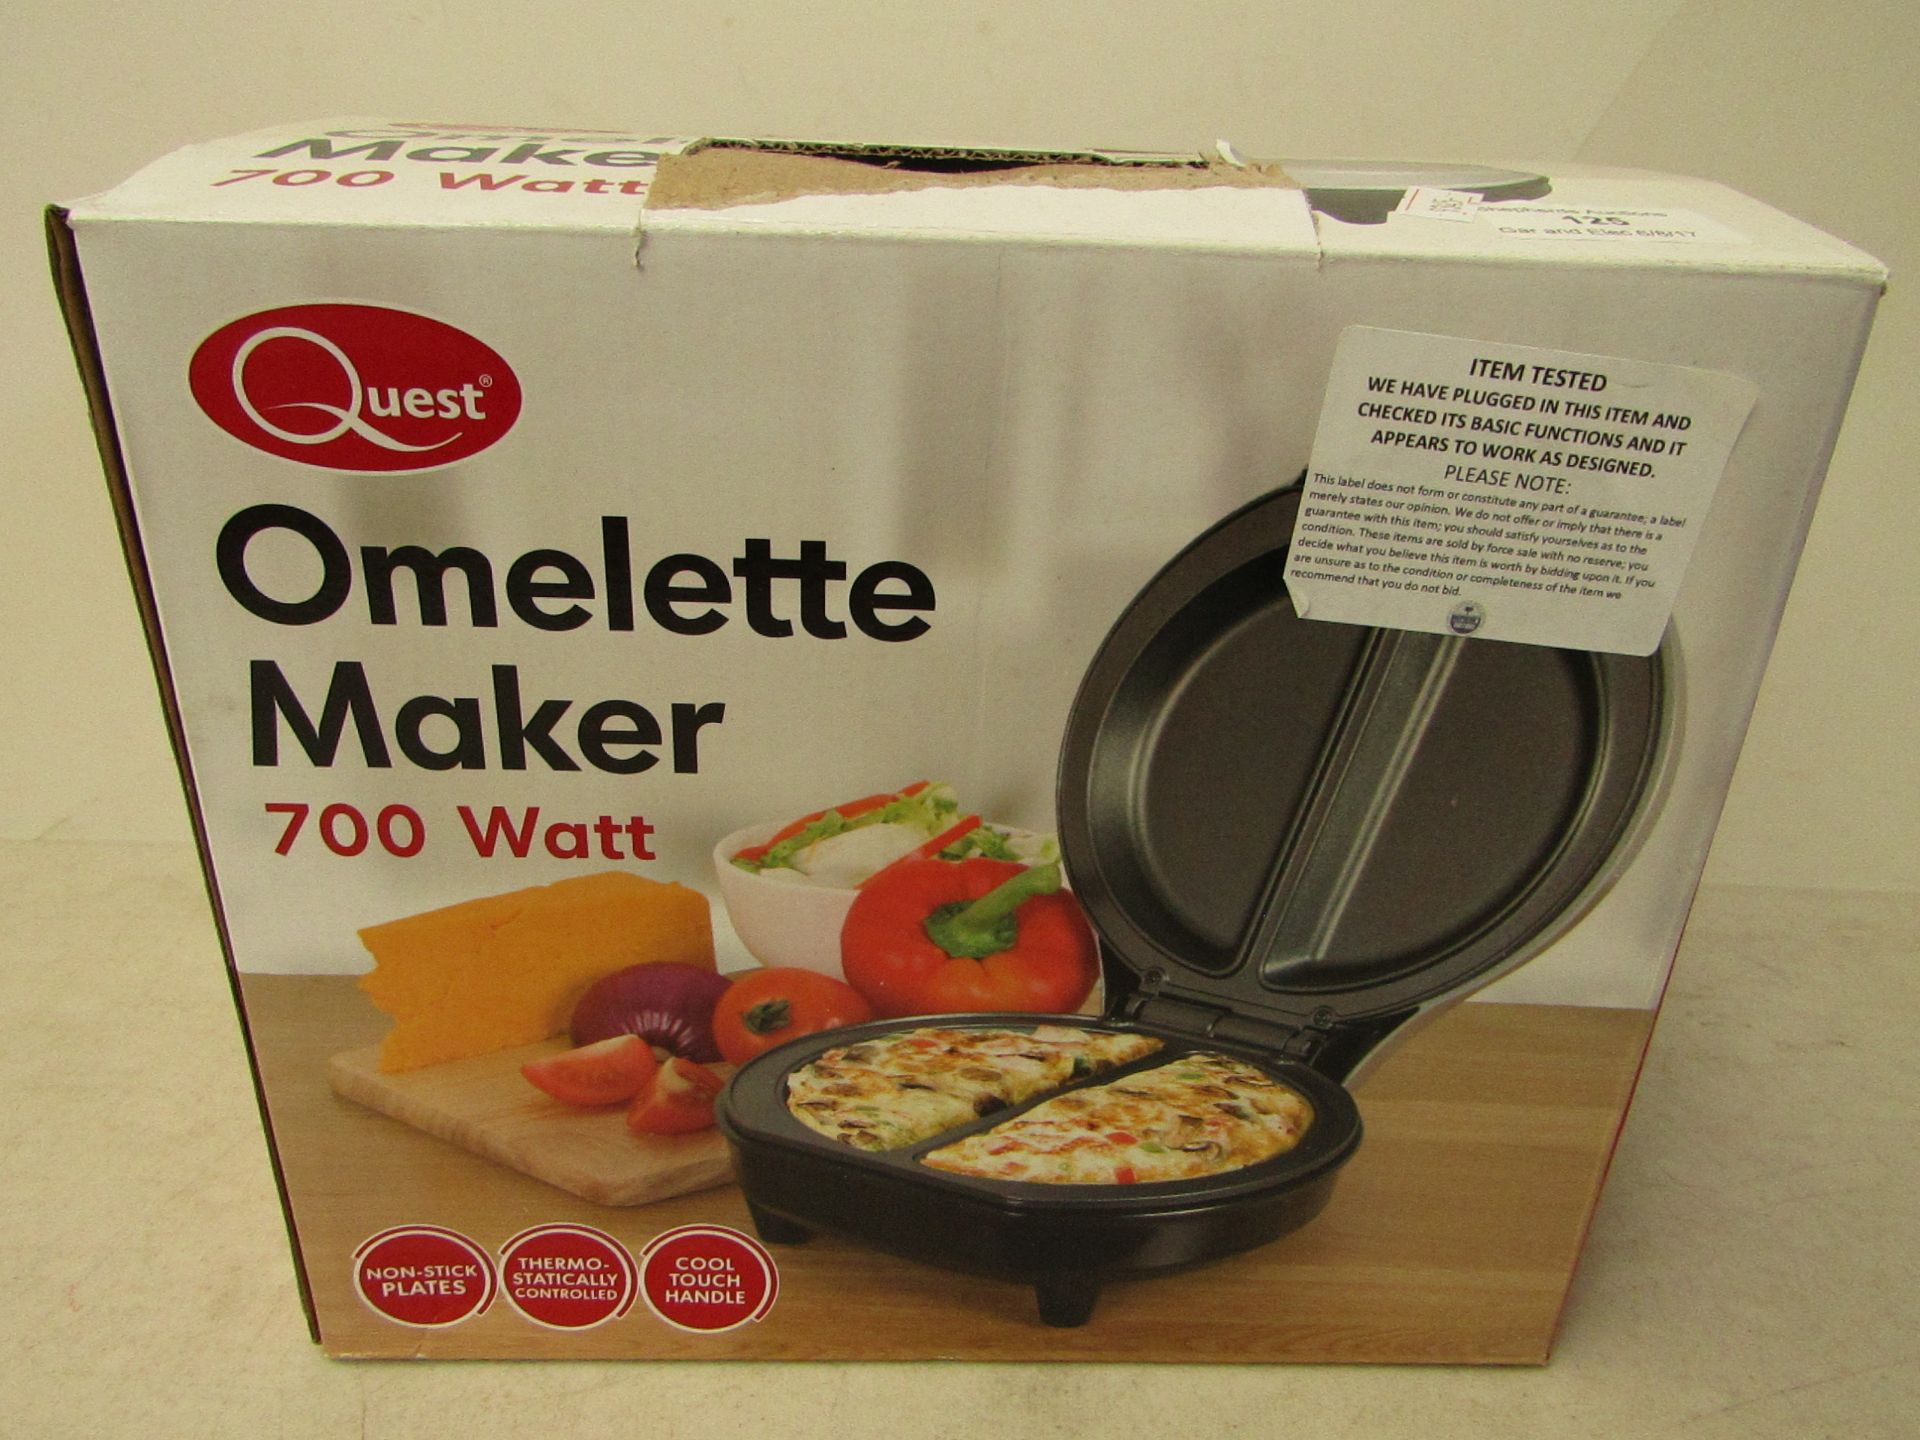 Quest 700w omlette maker, tested working and boxed